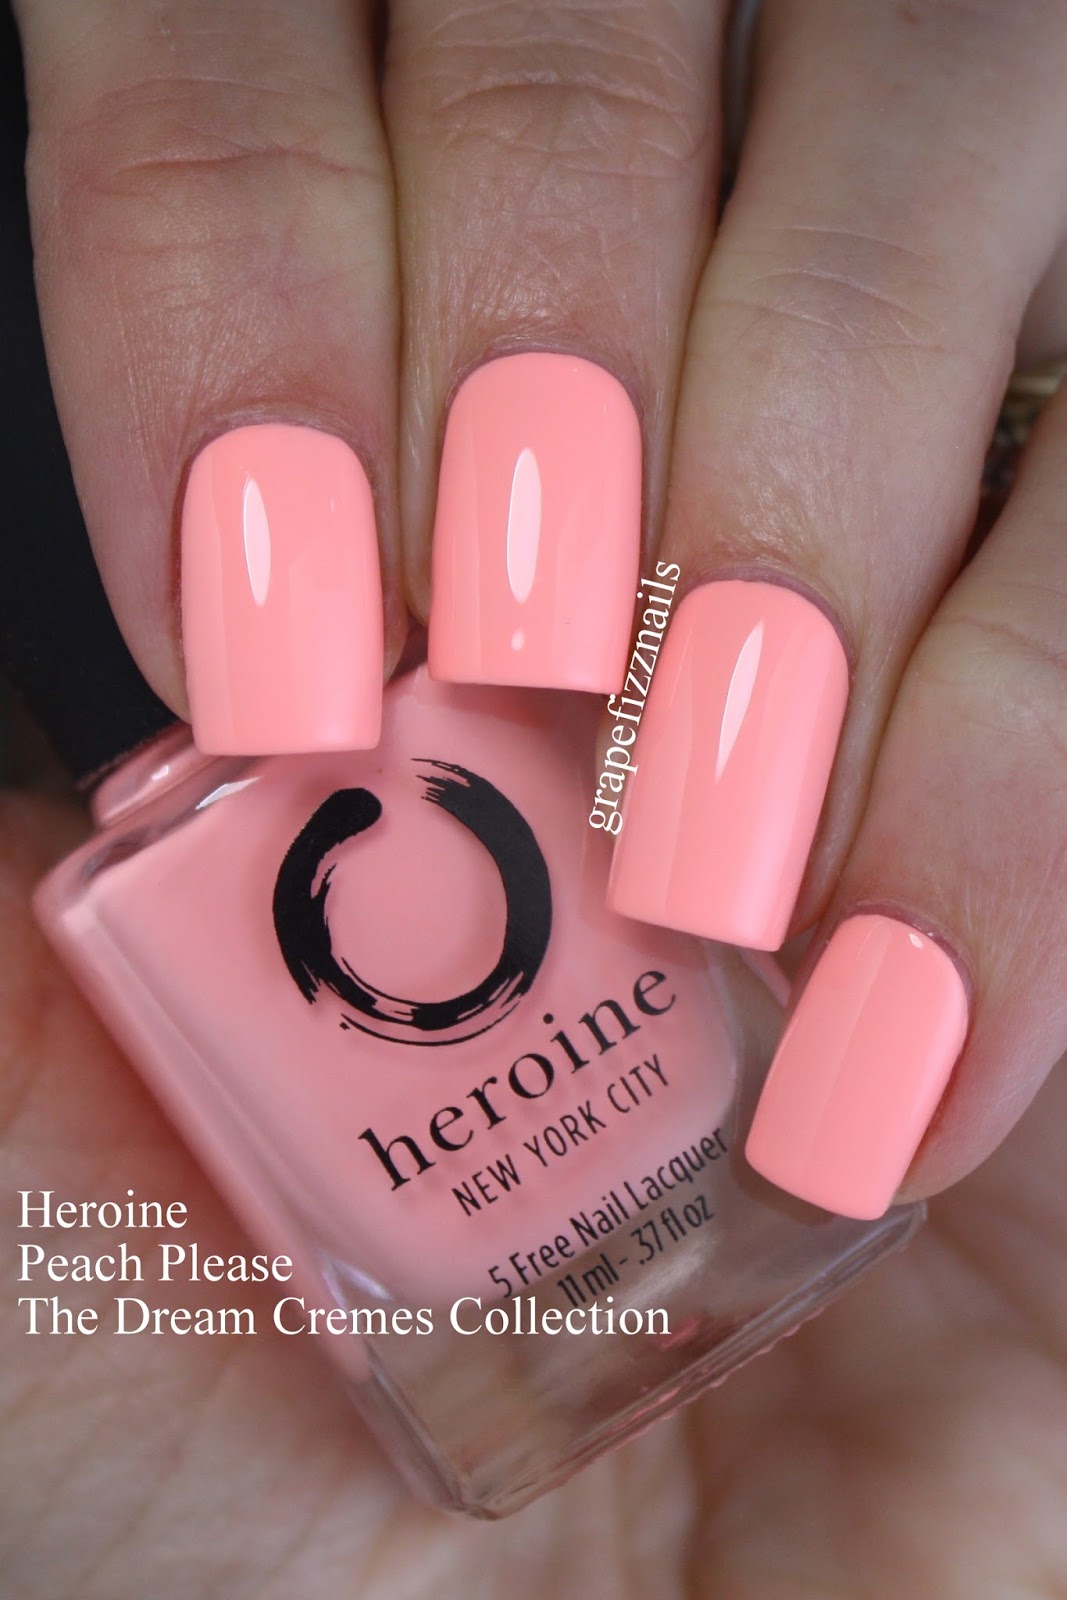 Grape Fizz Nails: Heroine, The Dream Cremes Collection